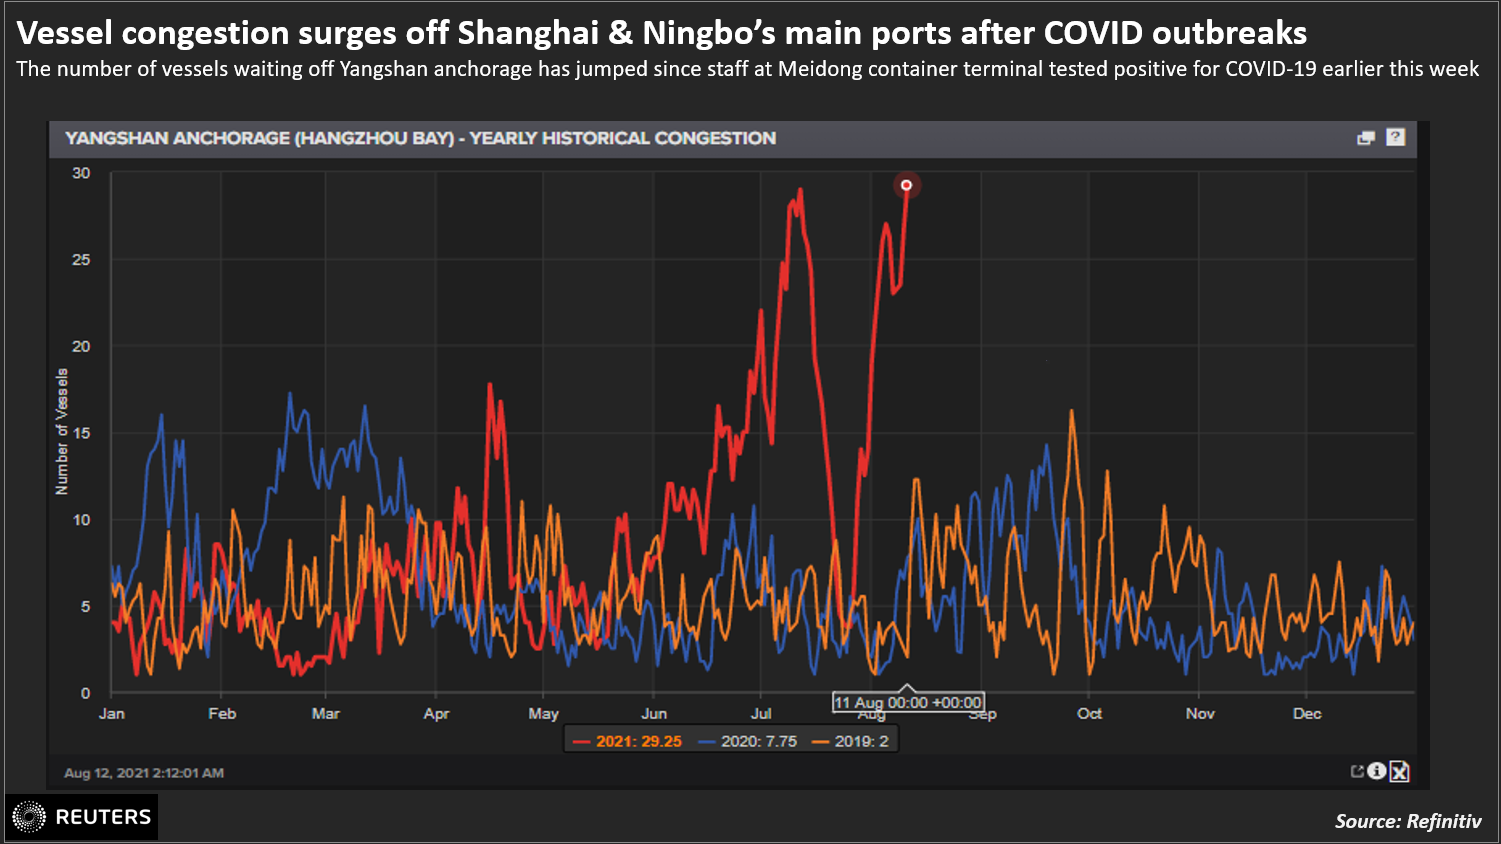 Vessel congestion surges off Shanghai & Ningbo’s main ports after COVID outbreaks